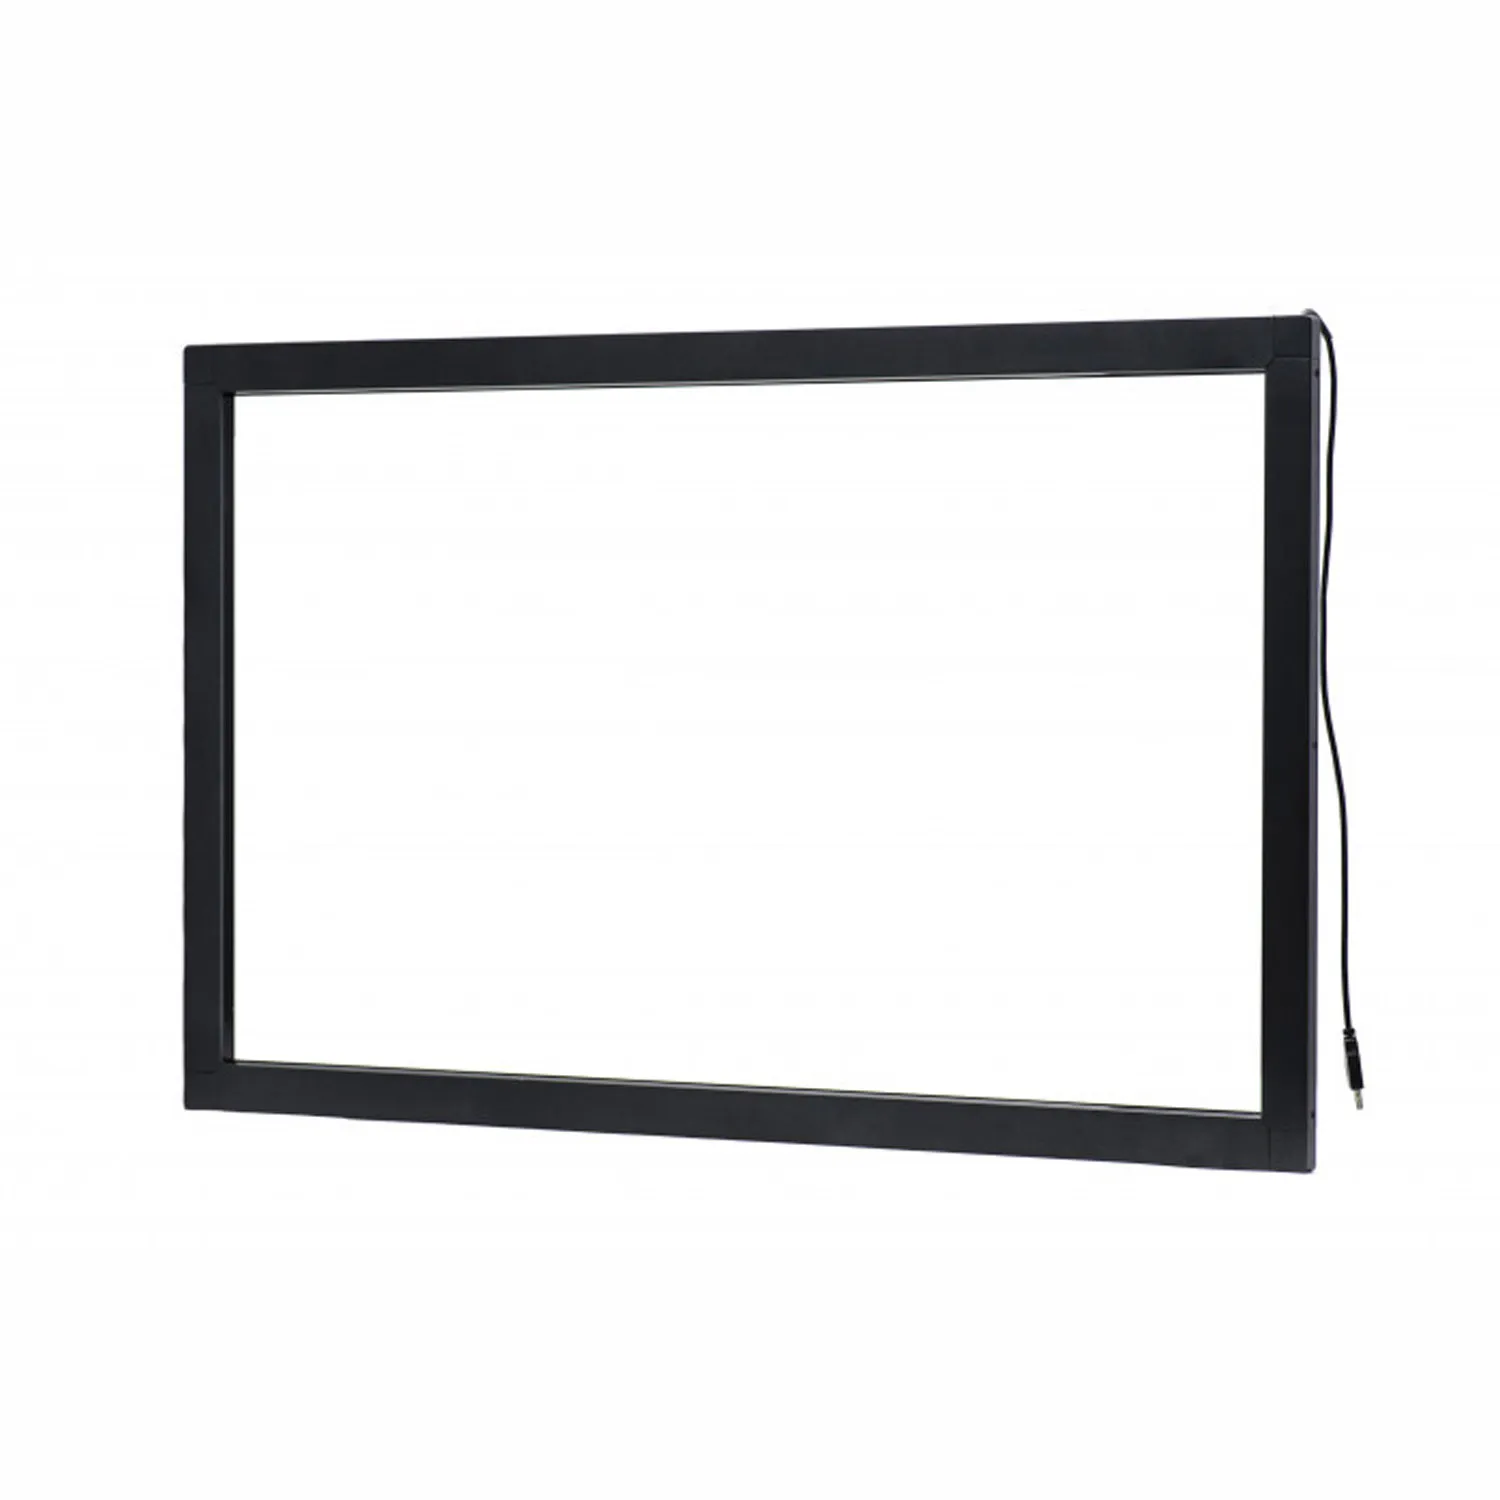 Touch frame Keetouch GmbH 40" KP-400-IP0S001